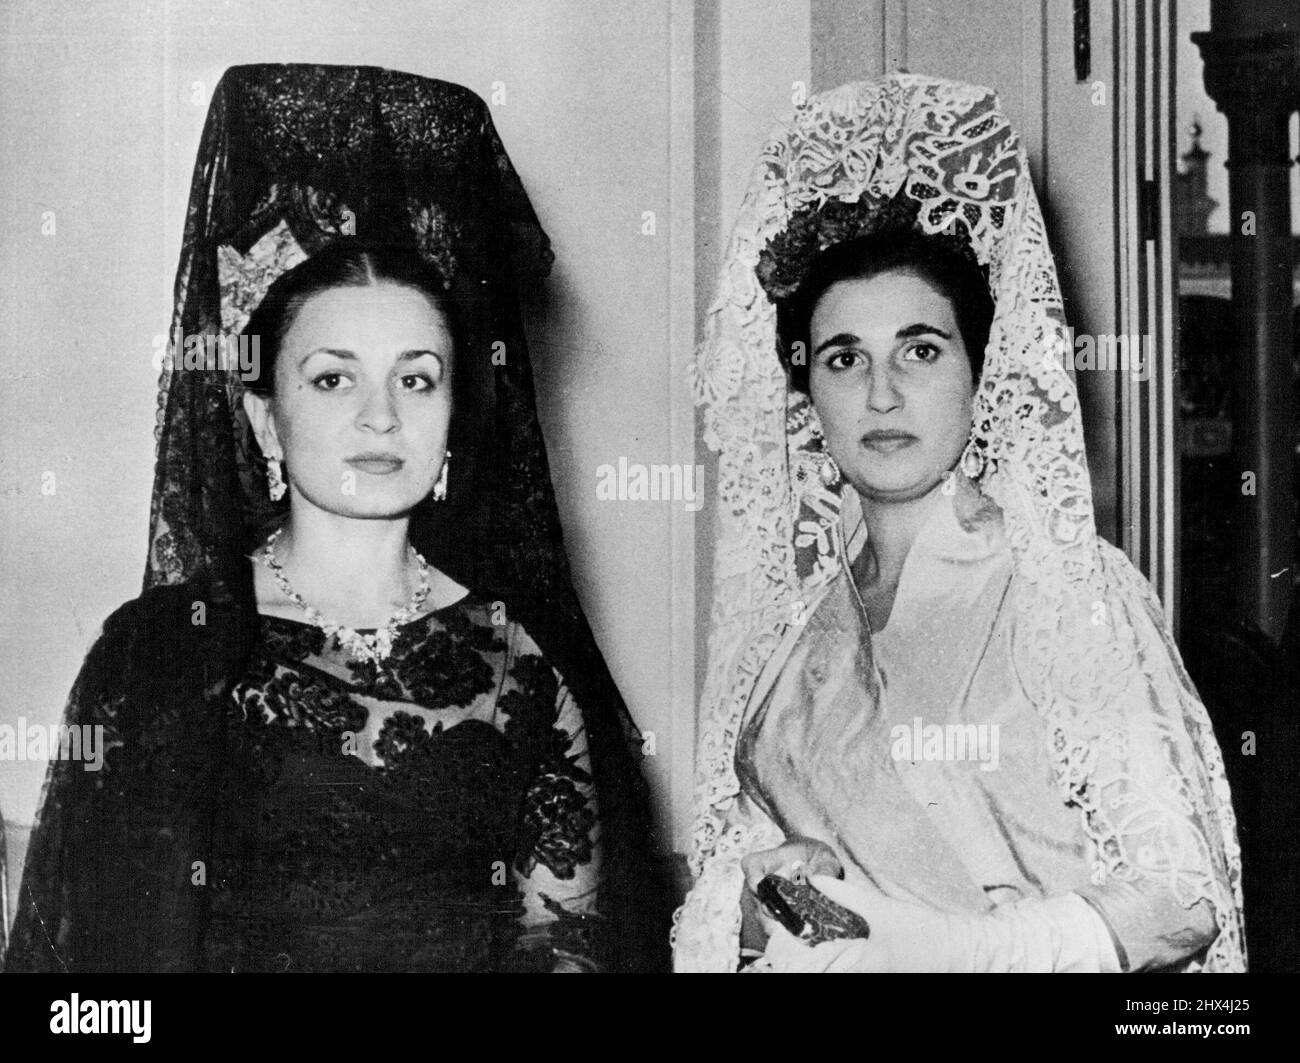 First Ladies -- Queen Dina of Jordan and Madame Franco wearing beautiful lace Mantillas when they attended one of the many receptions in Madrid this week in honour of King Hussein and Queen Dina, who will be arriving in this country next week. June 10, 1955. (Photo by Paul Popper, Paul Popper Ltd.). Stock Photo